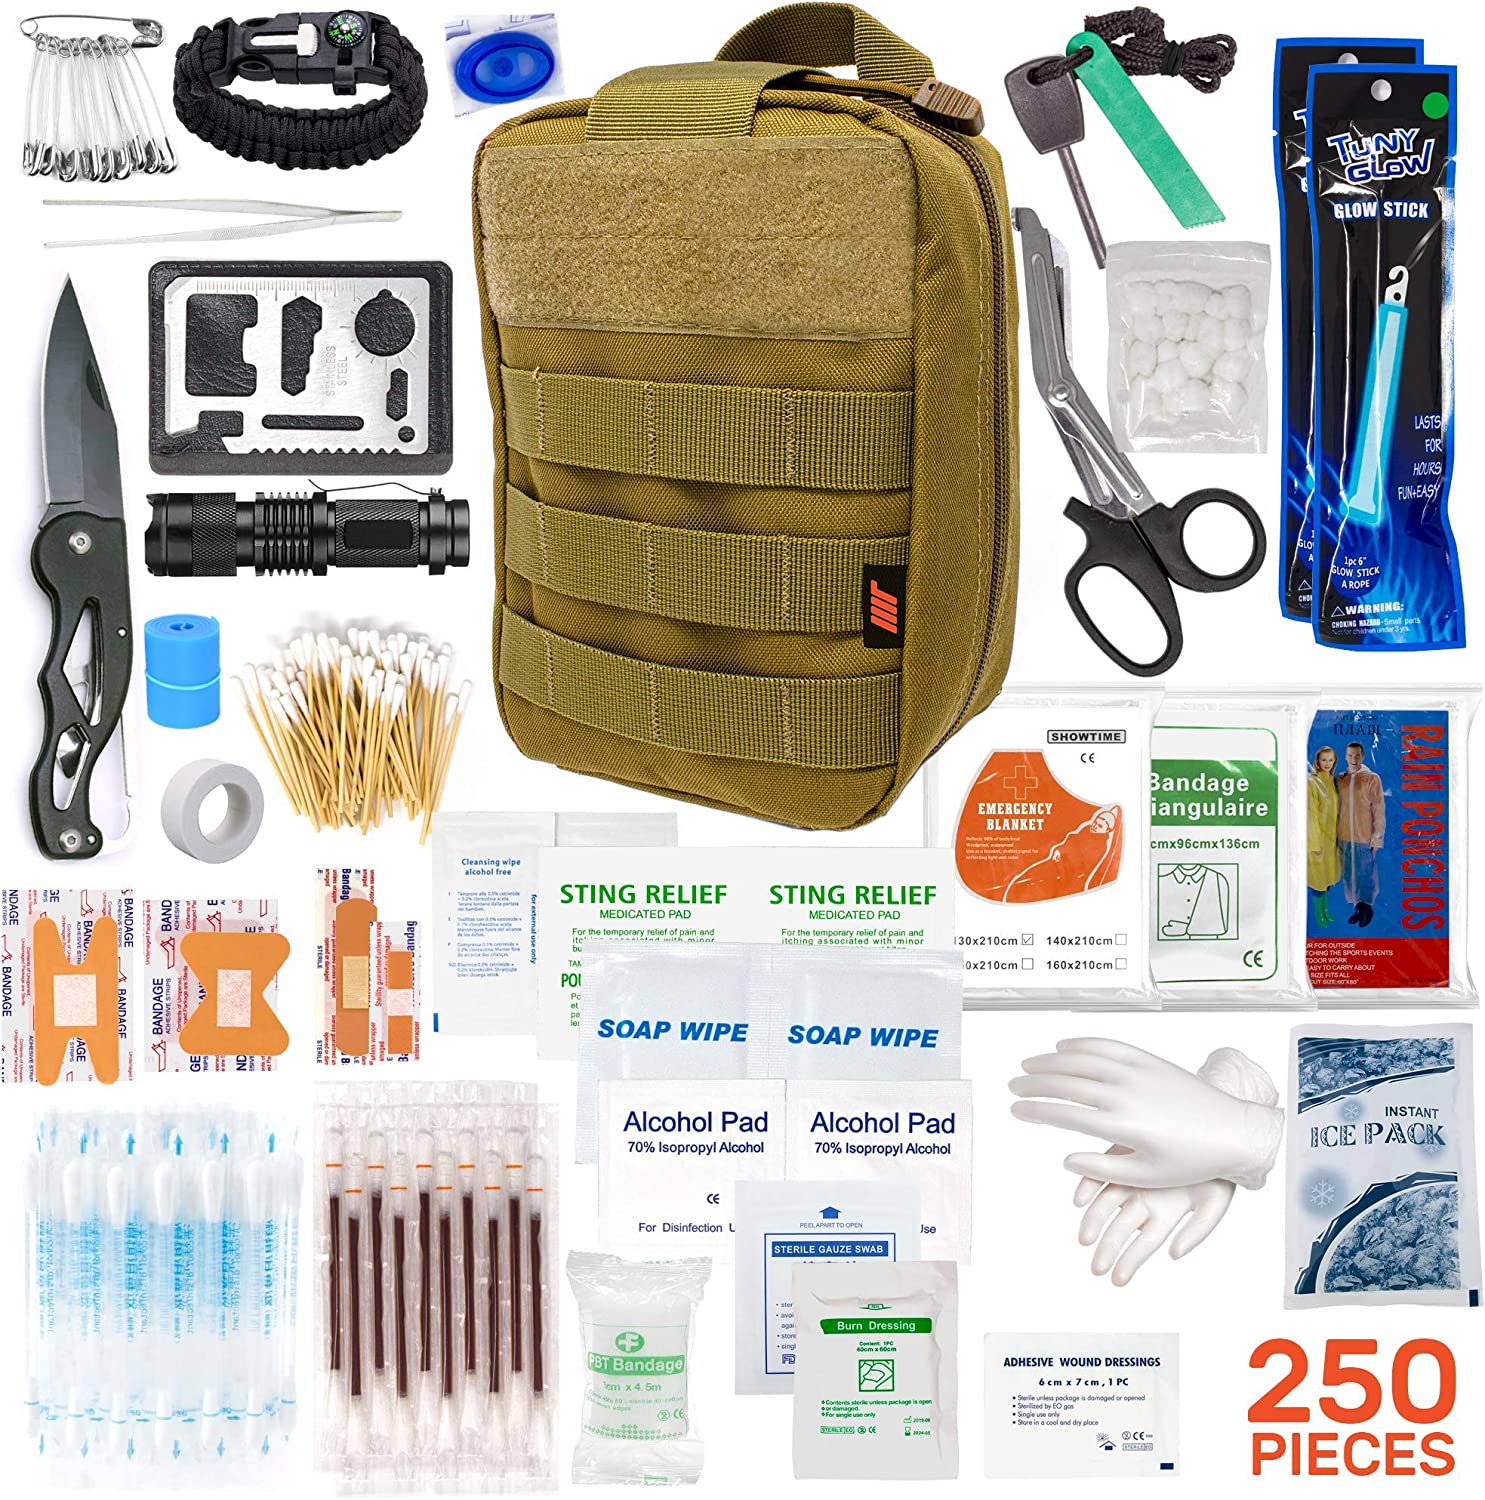 250pcs Tactical First Aid Kit Supplies with Molle Compatible Bag – Perfect as Emergency Kit, Survival Kit, First Aid Kit for Car and Boat, Travel First Aid Kit for Camping Hiking, Med Kit (Tan)